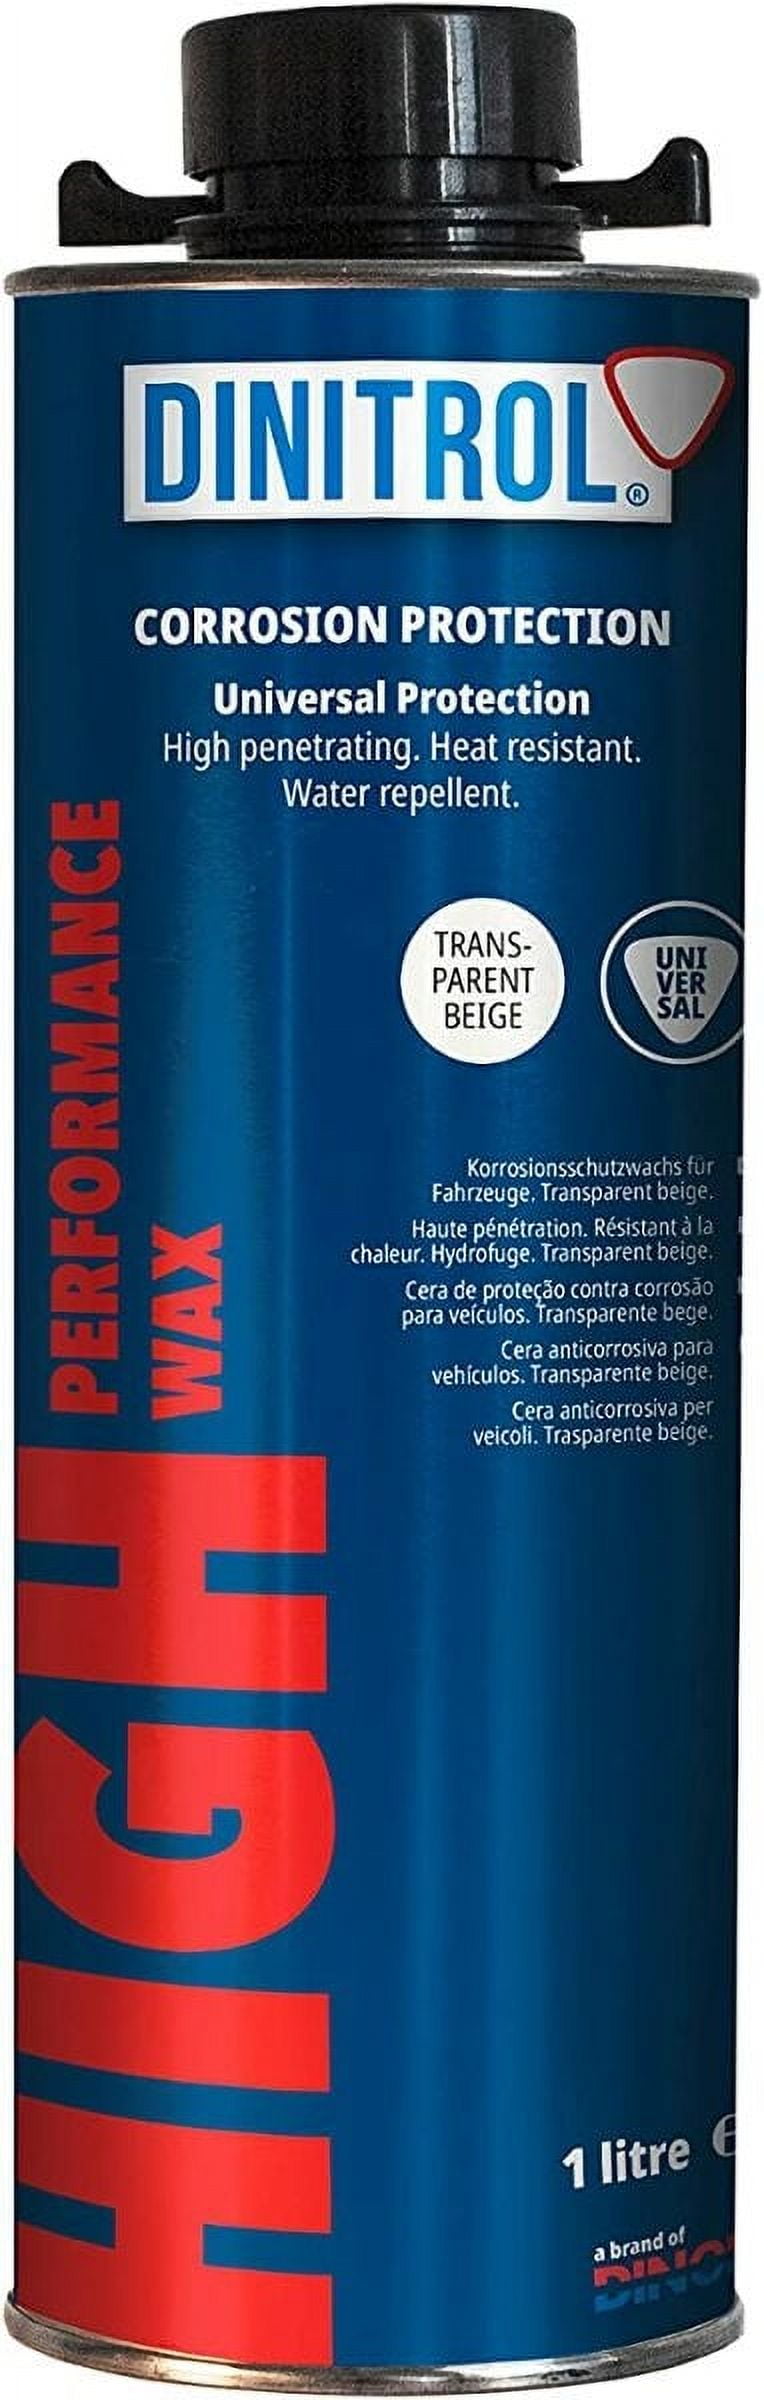 Normfest Protector - Cavity Protection 1000ml